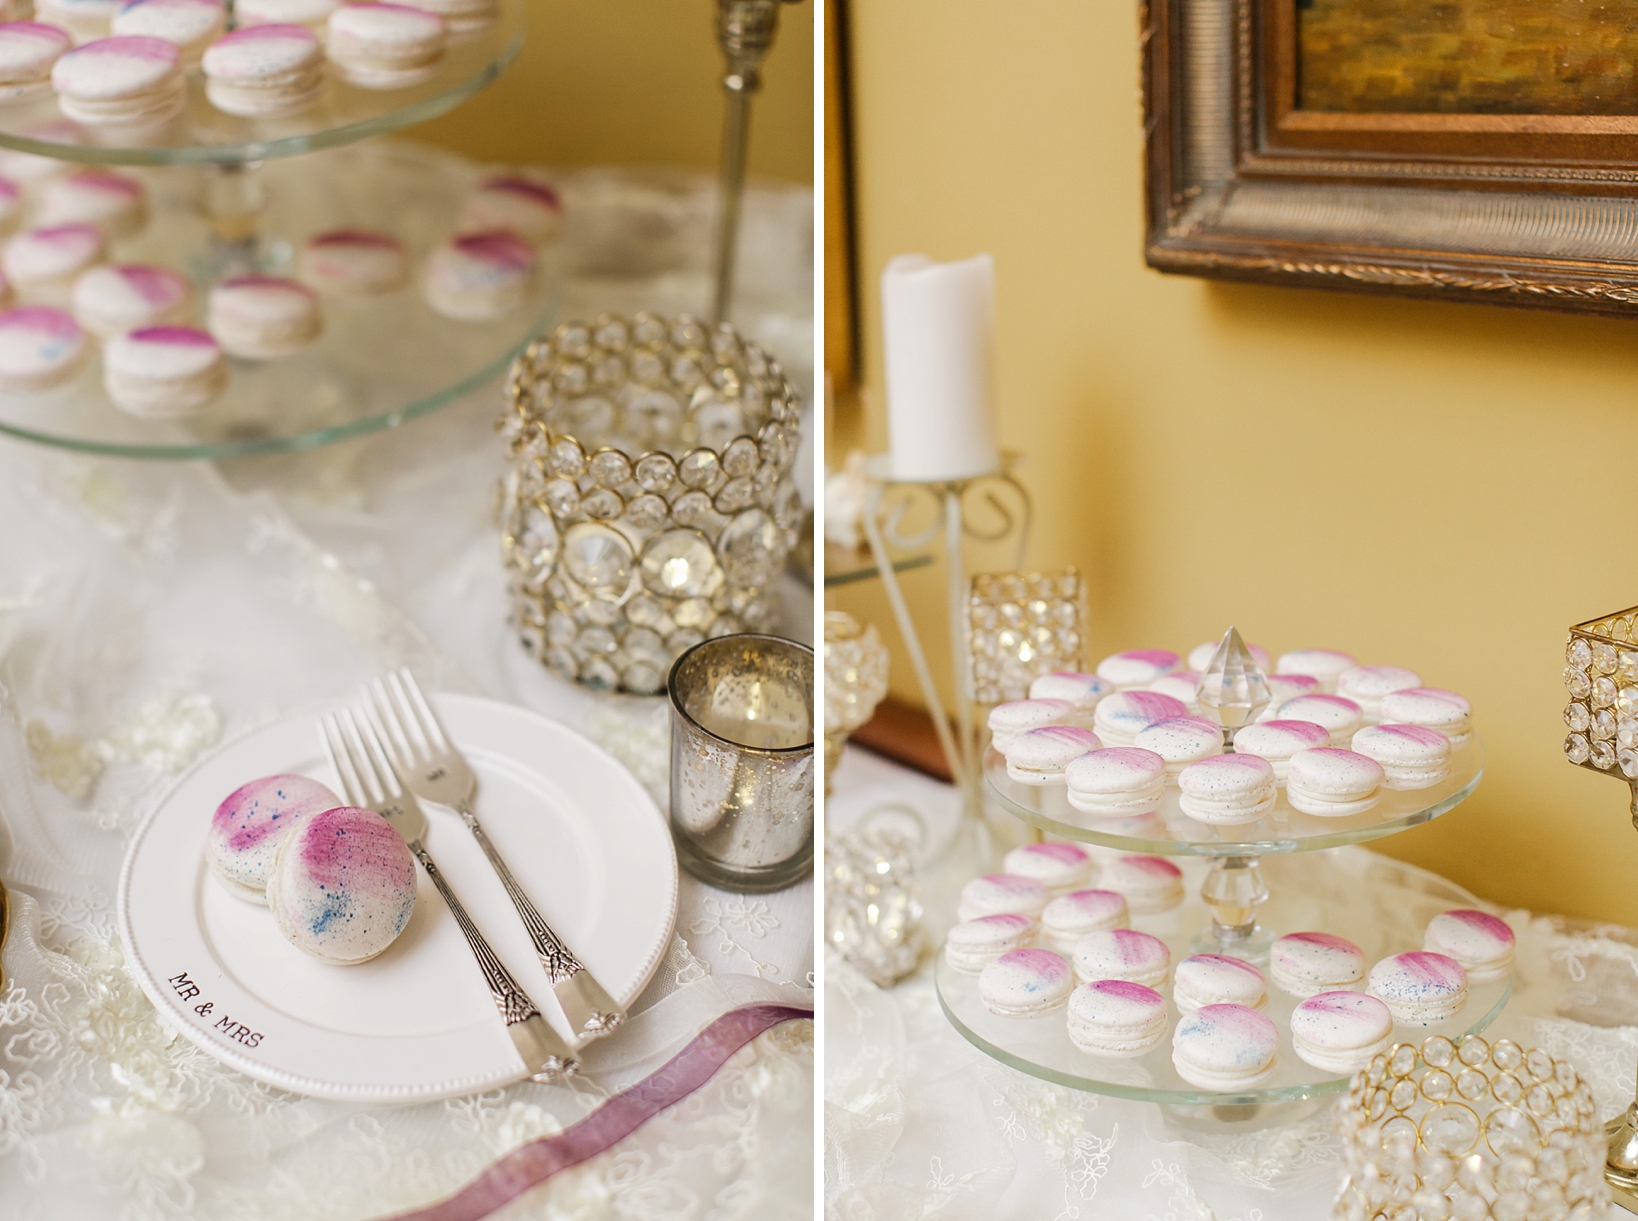 Dessert table featuring macarons and crystal candle holders by Sarah & Ben Photography